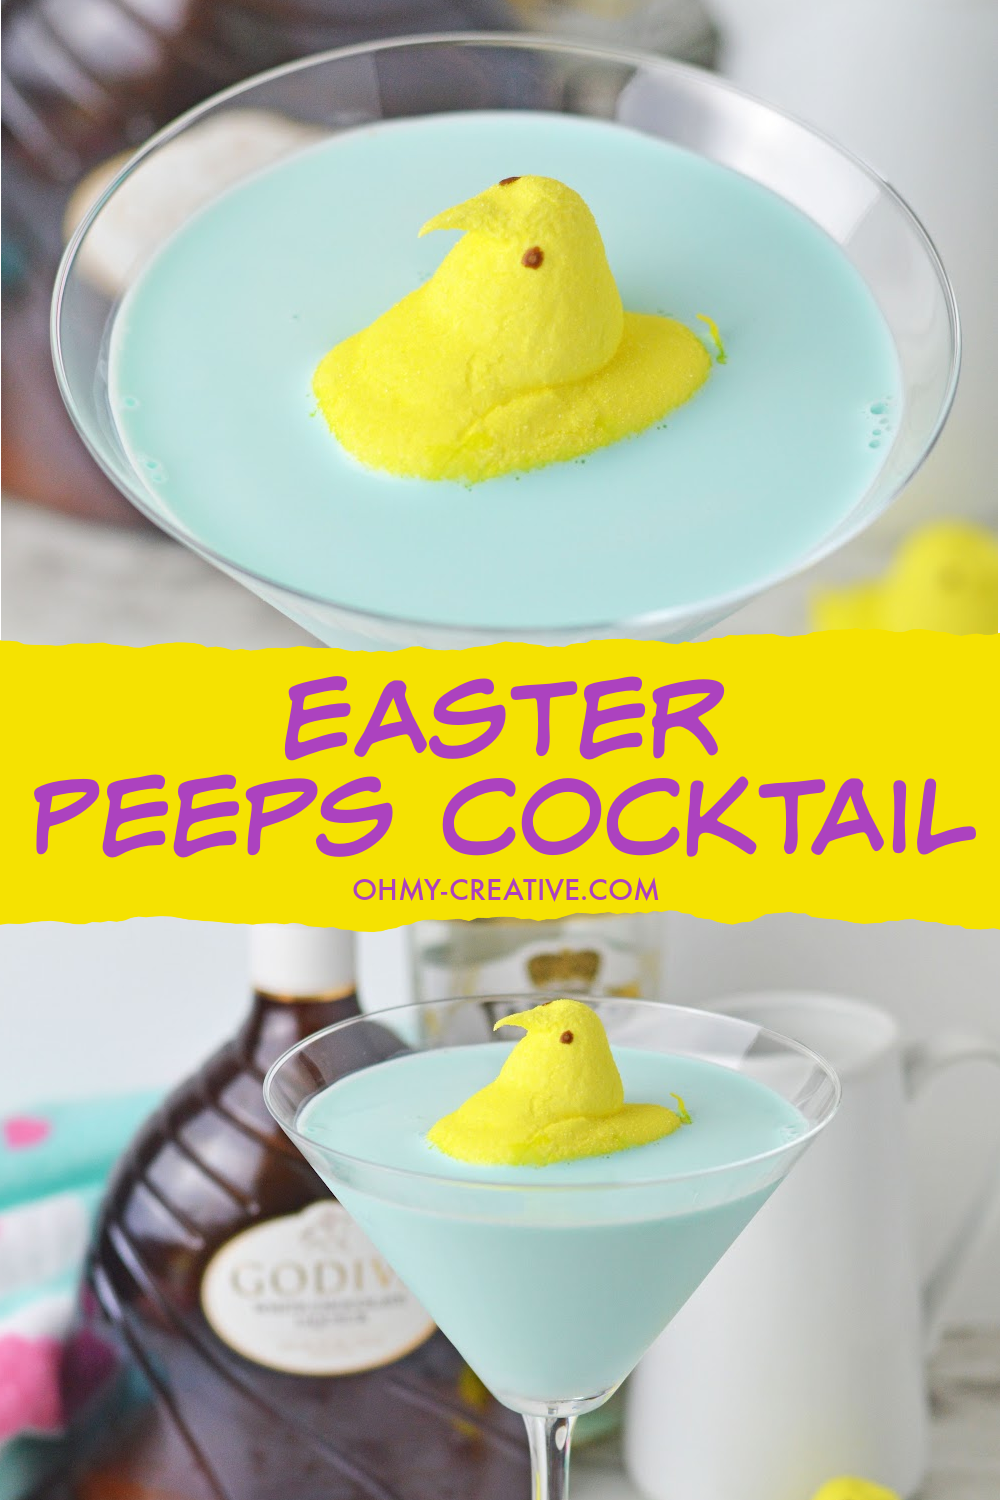 A colorful Easter Peeps cocktail martini that is blue with a yellow chick Peeps floating in the center.